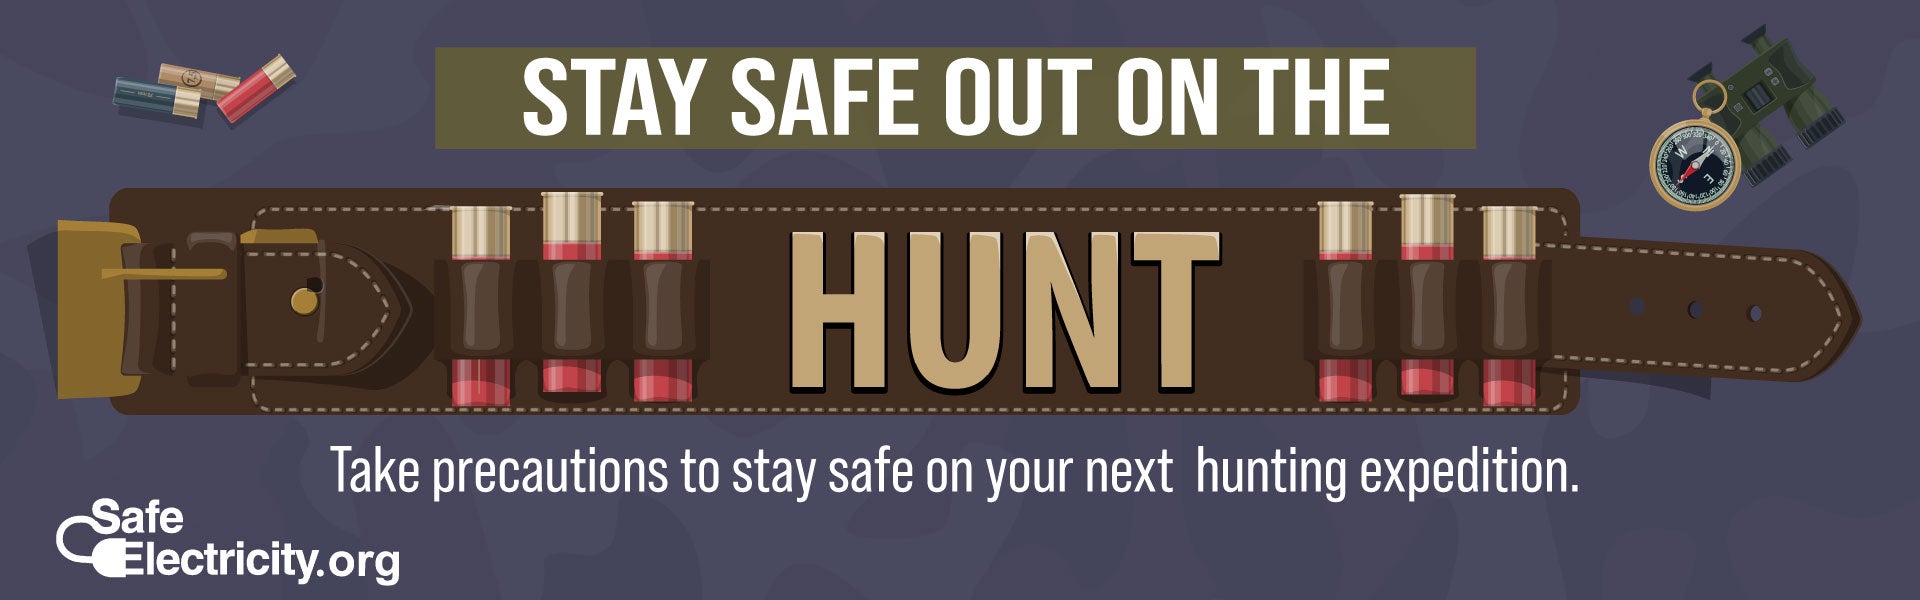 Safe hunting practices